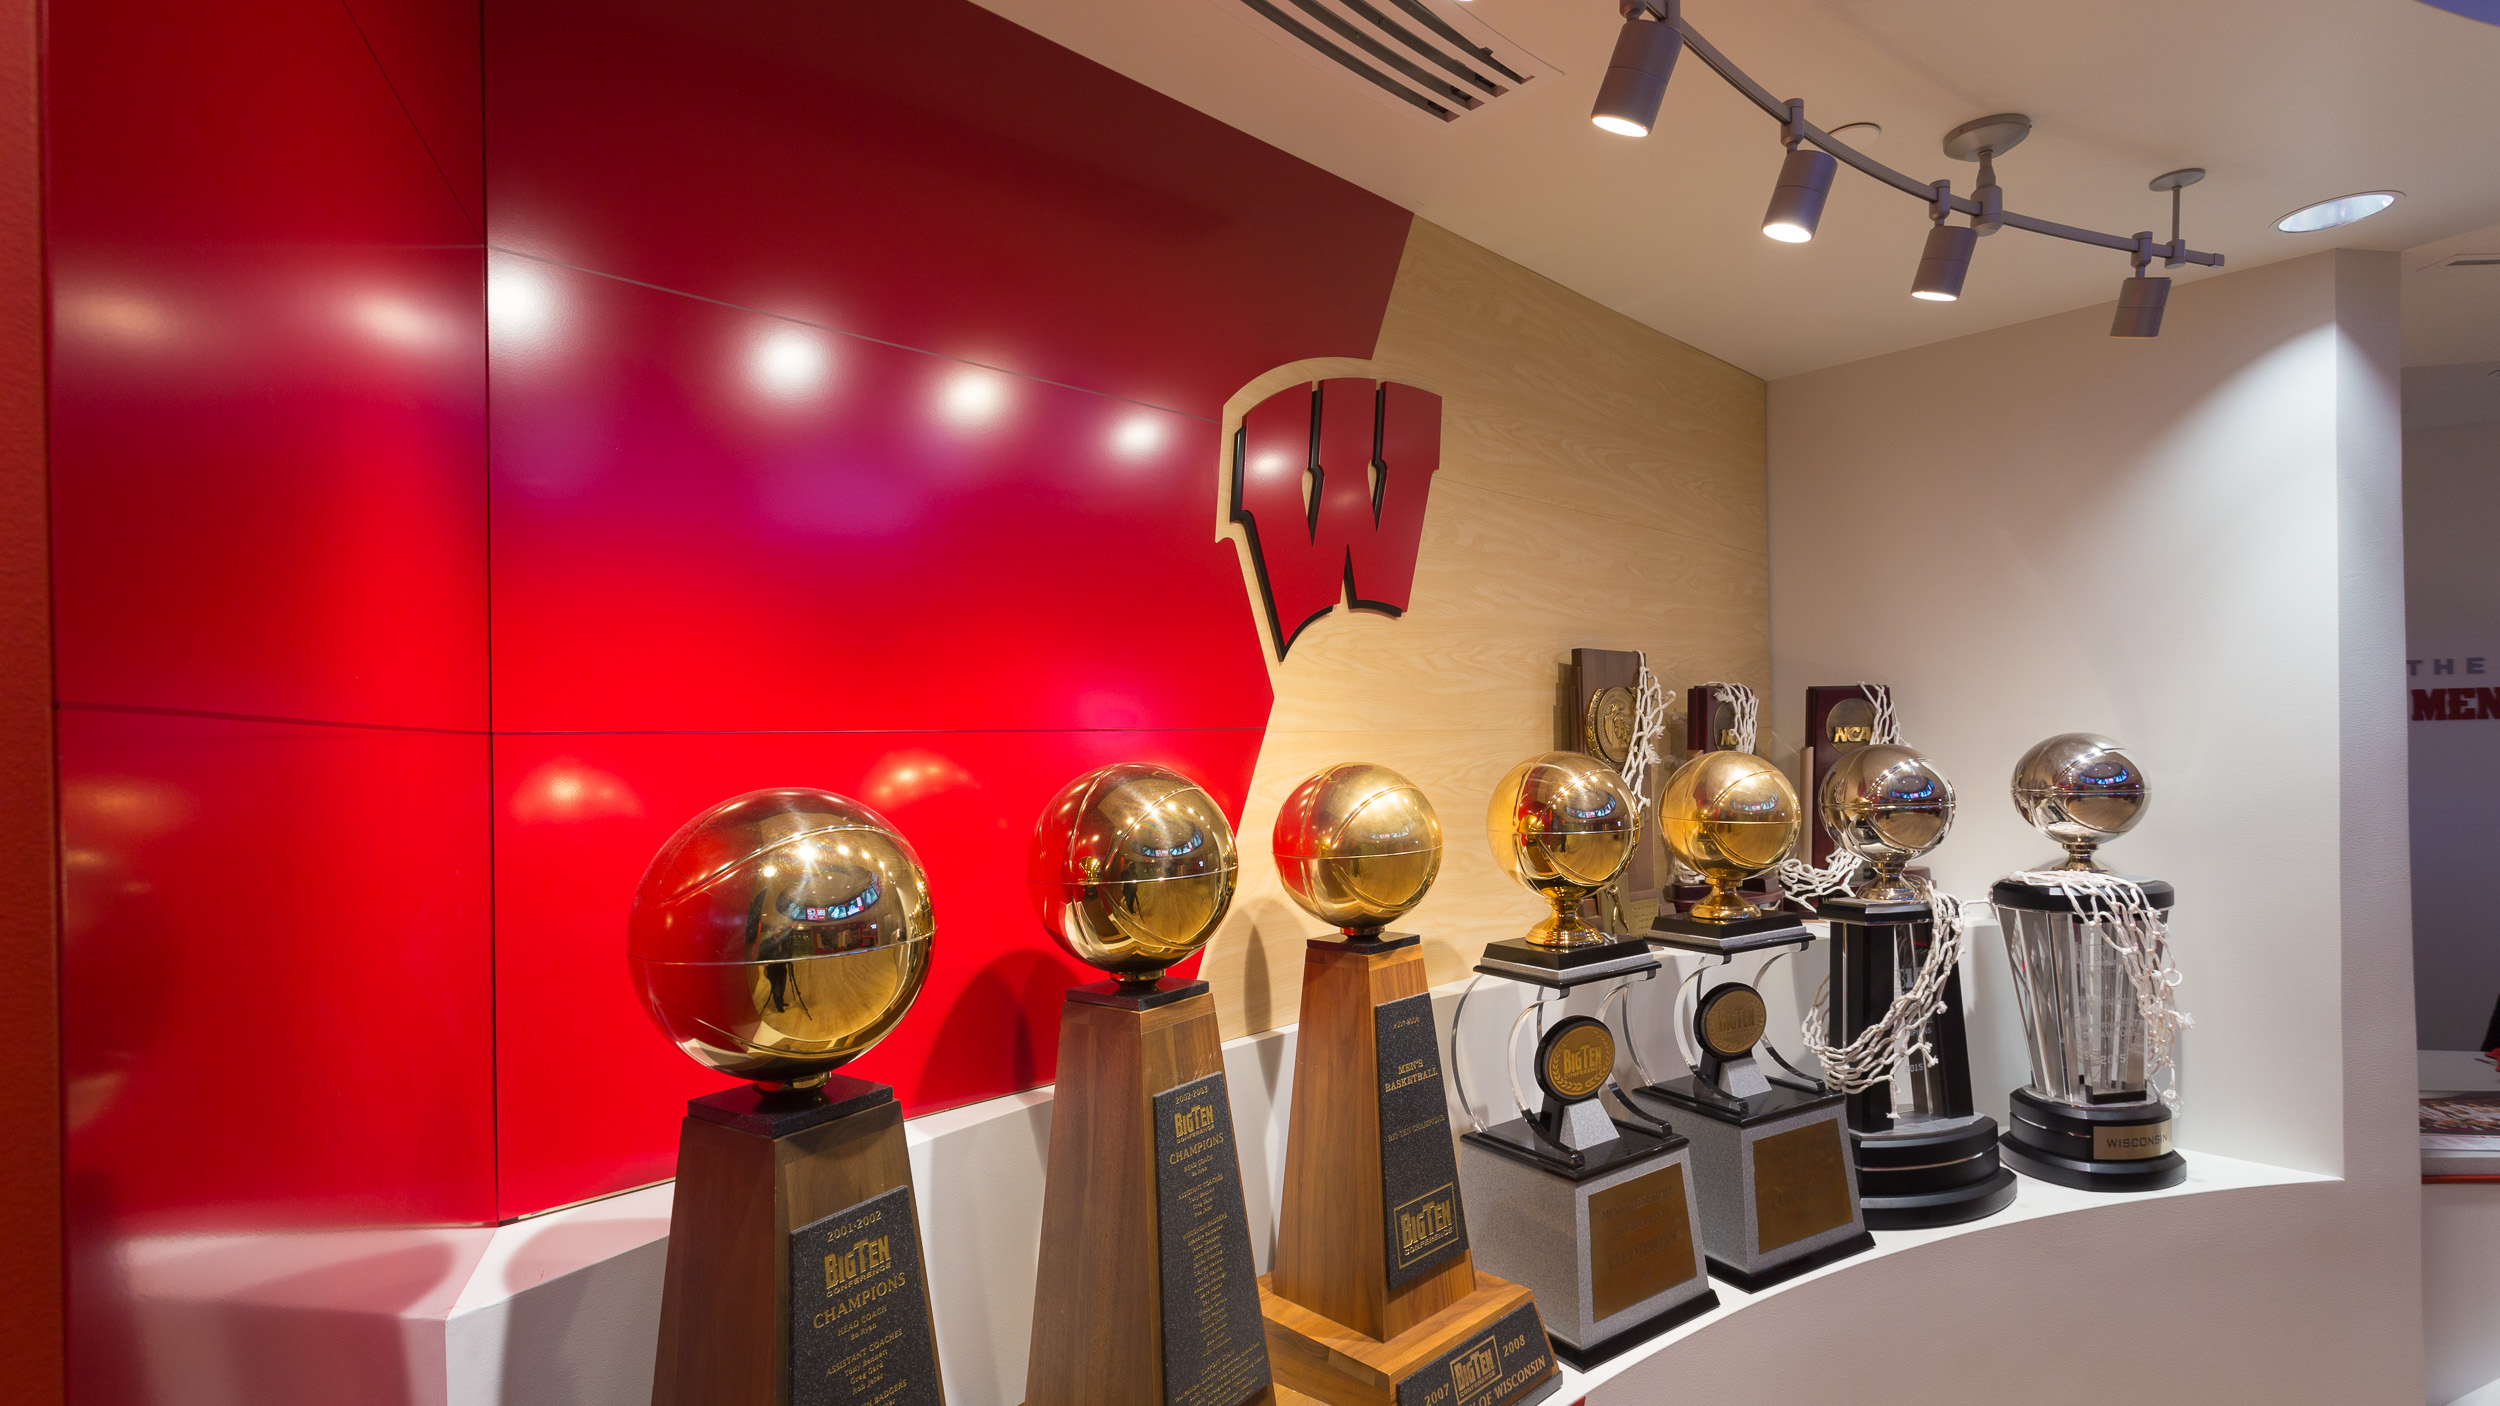 University of Wisconsin - Basketball Offices Trophy Display